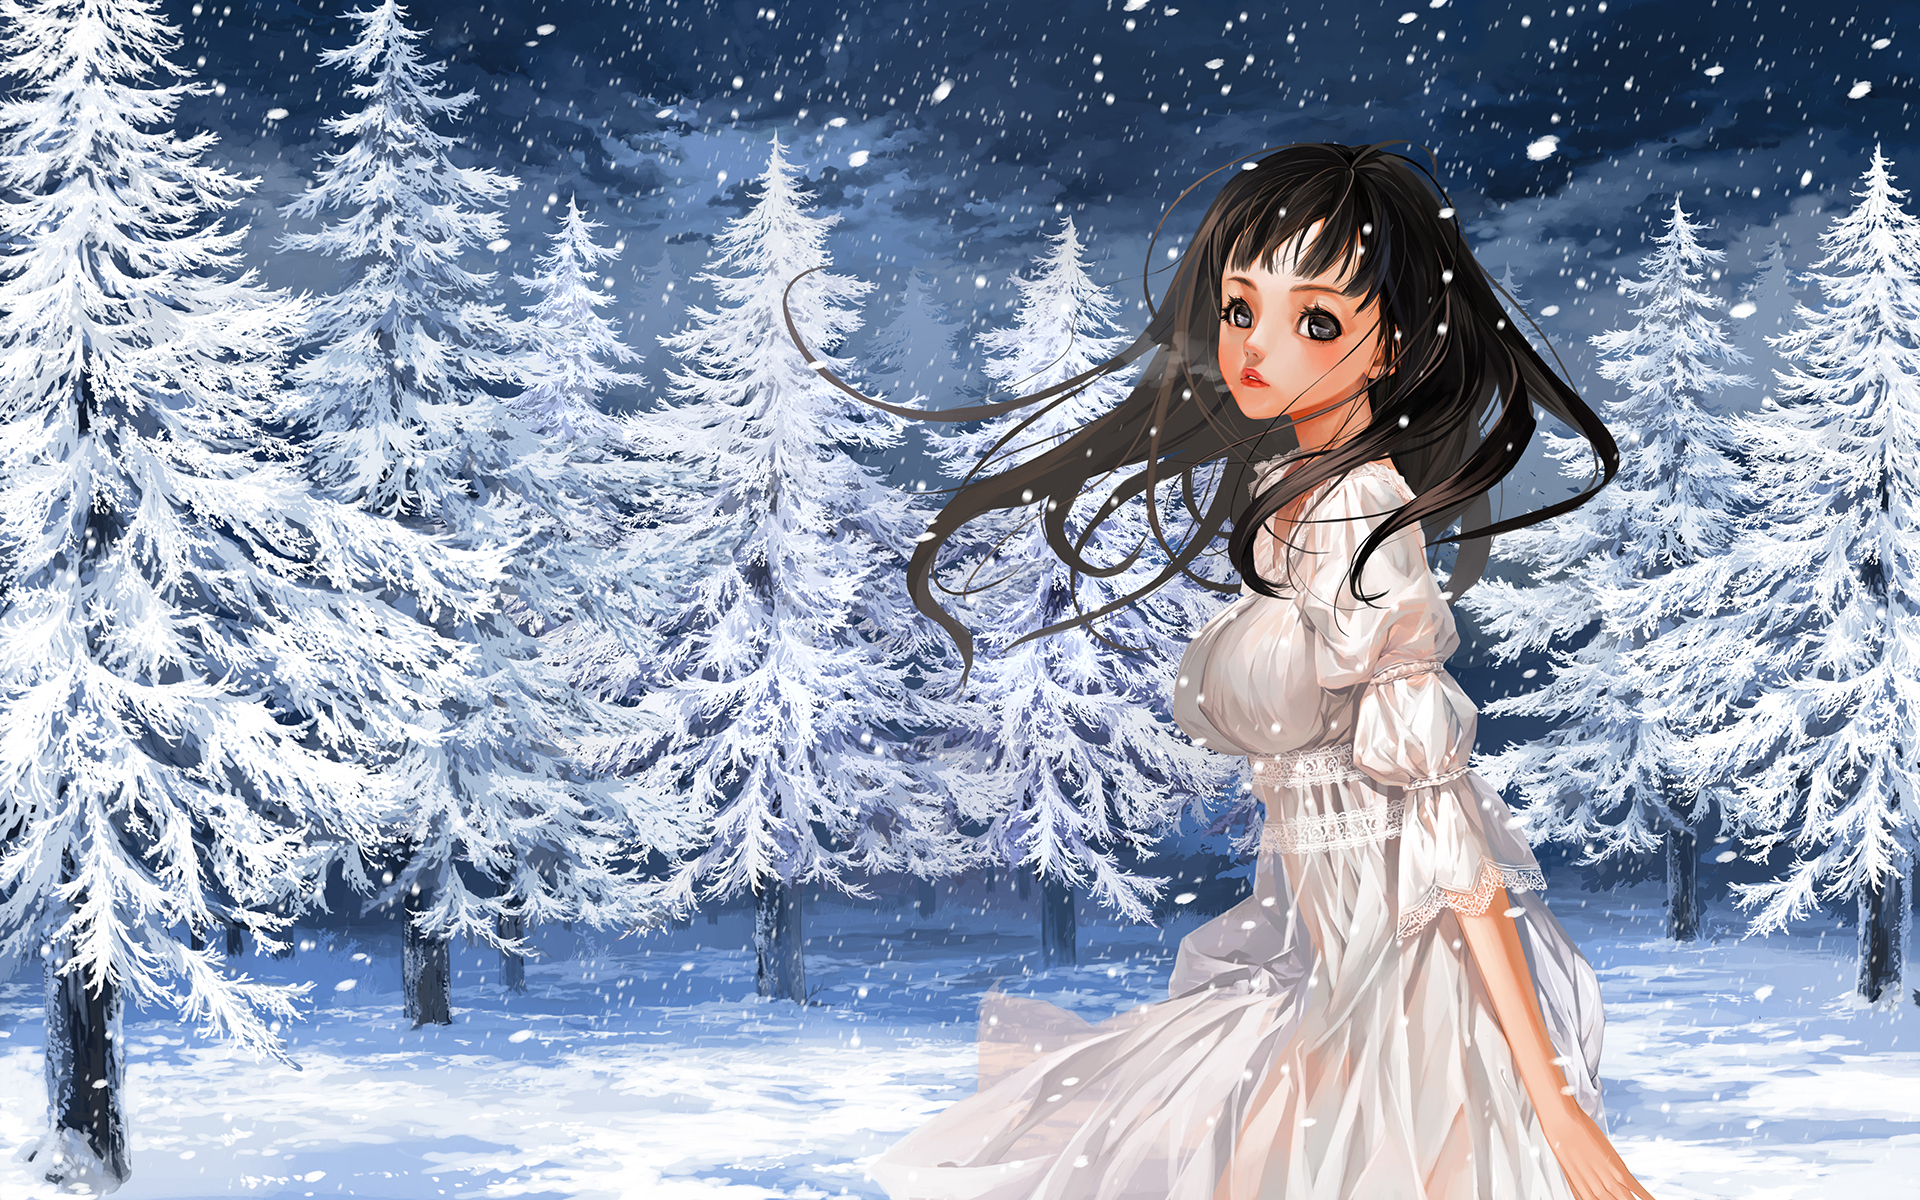 Download wallpaper 800x1200 girl phone snow winter anime iphone 4s4  for parallax hd background